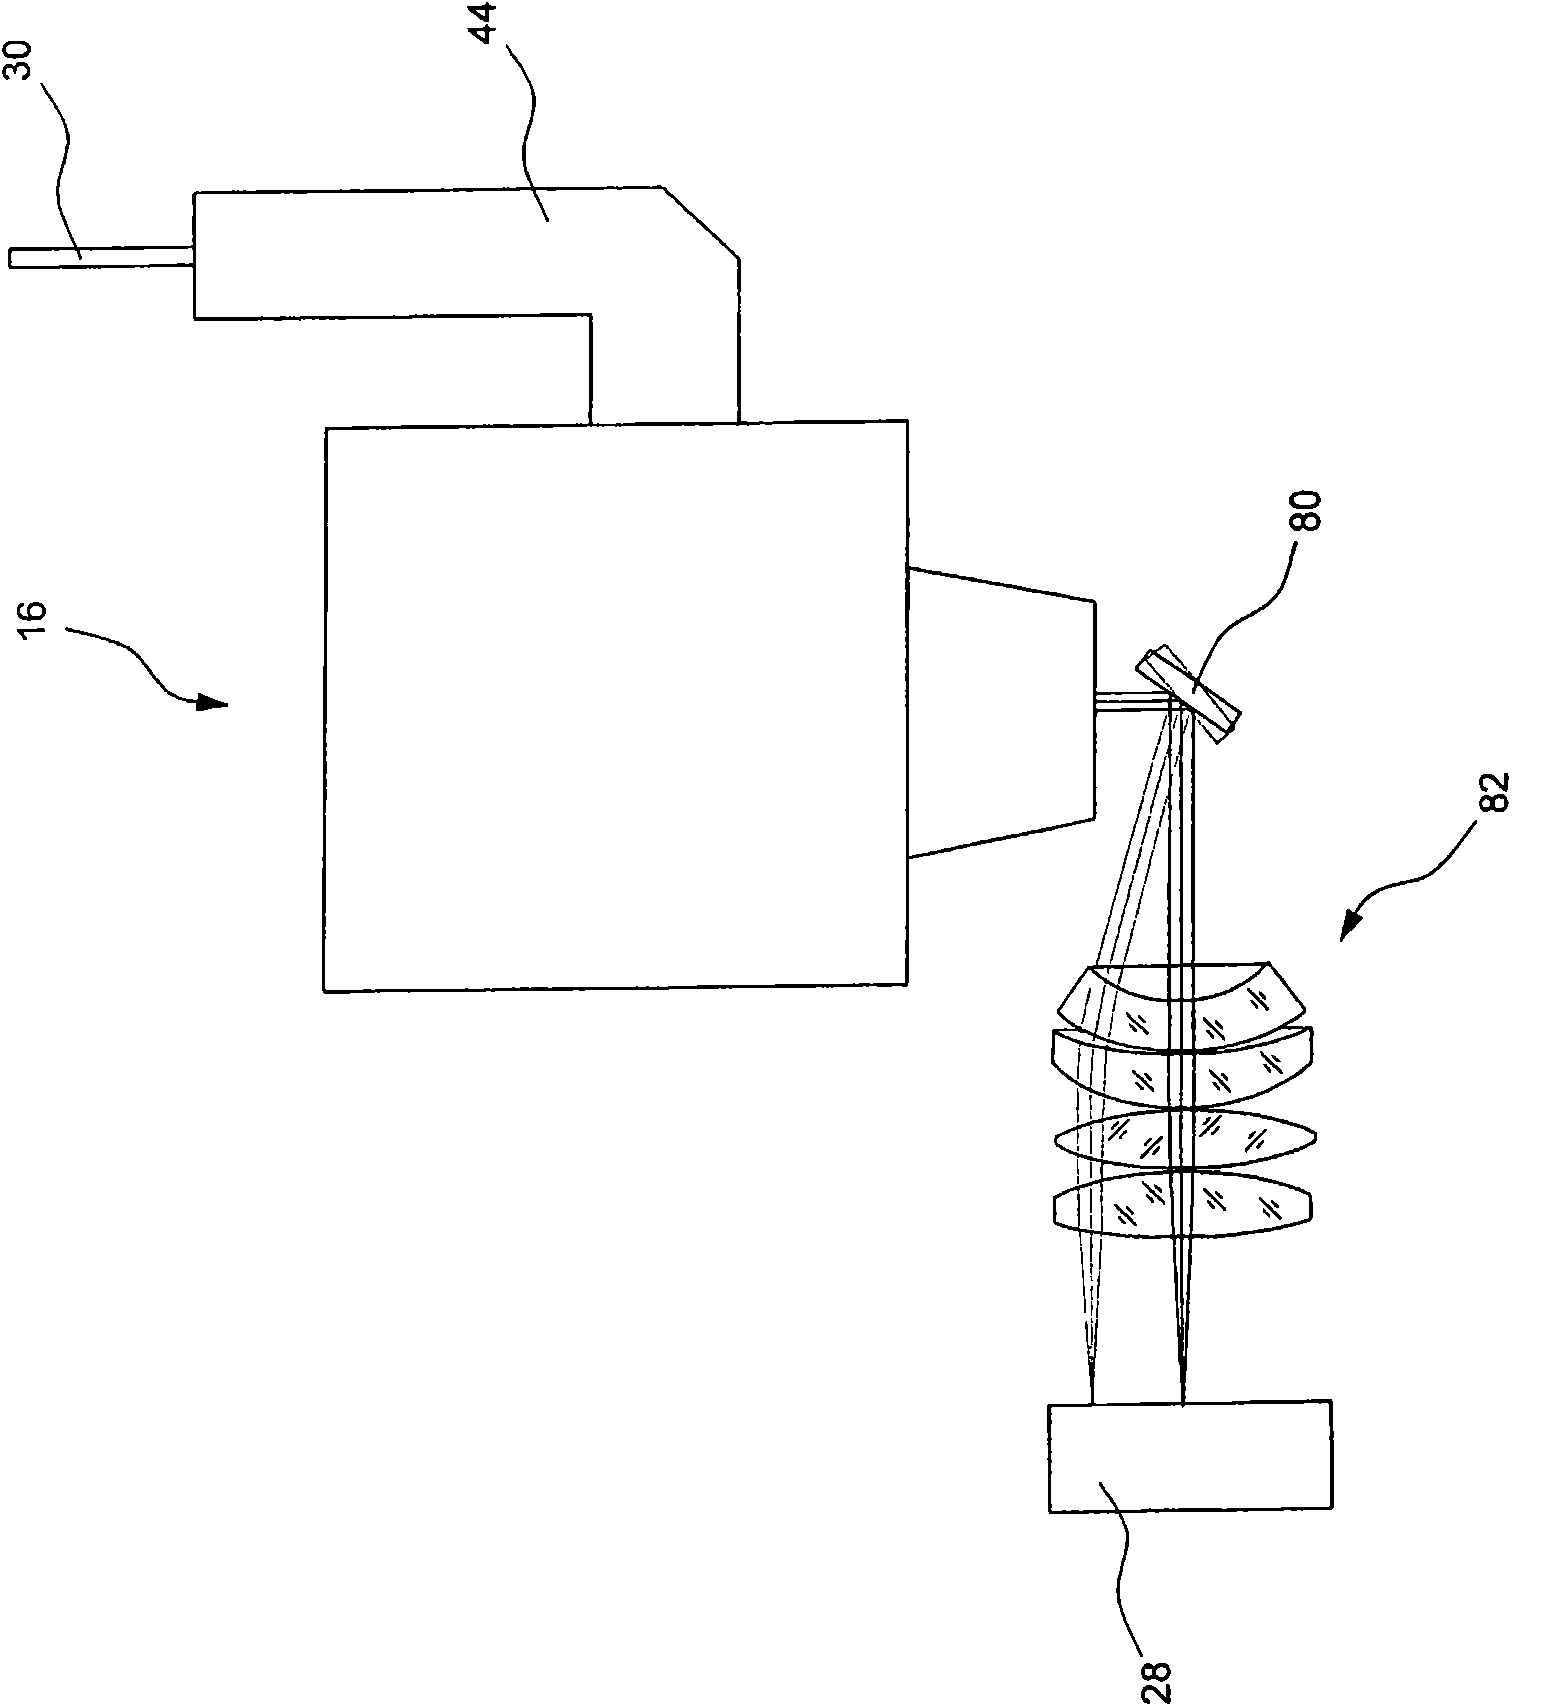 Machining device and method for machining material